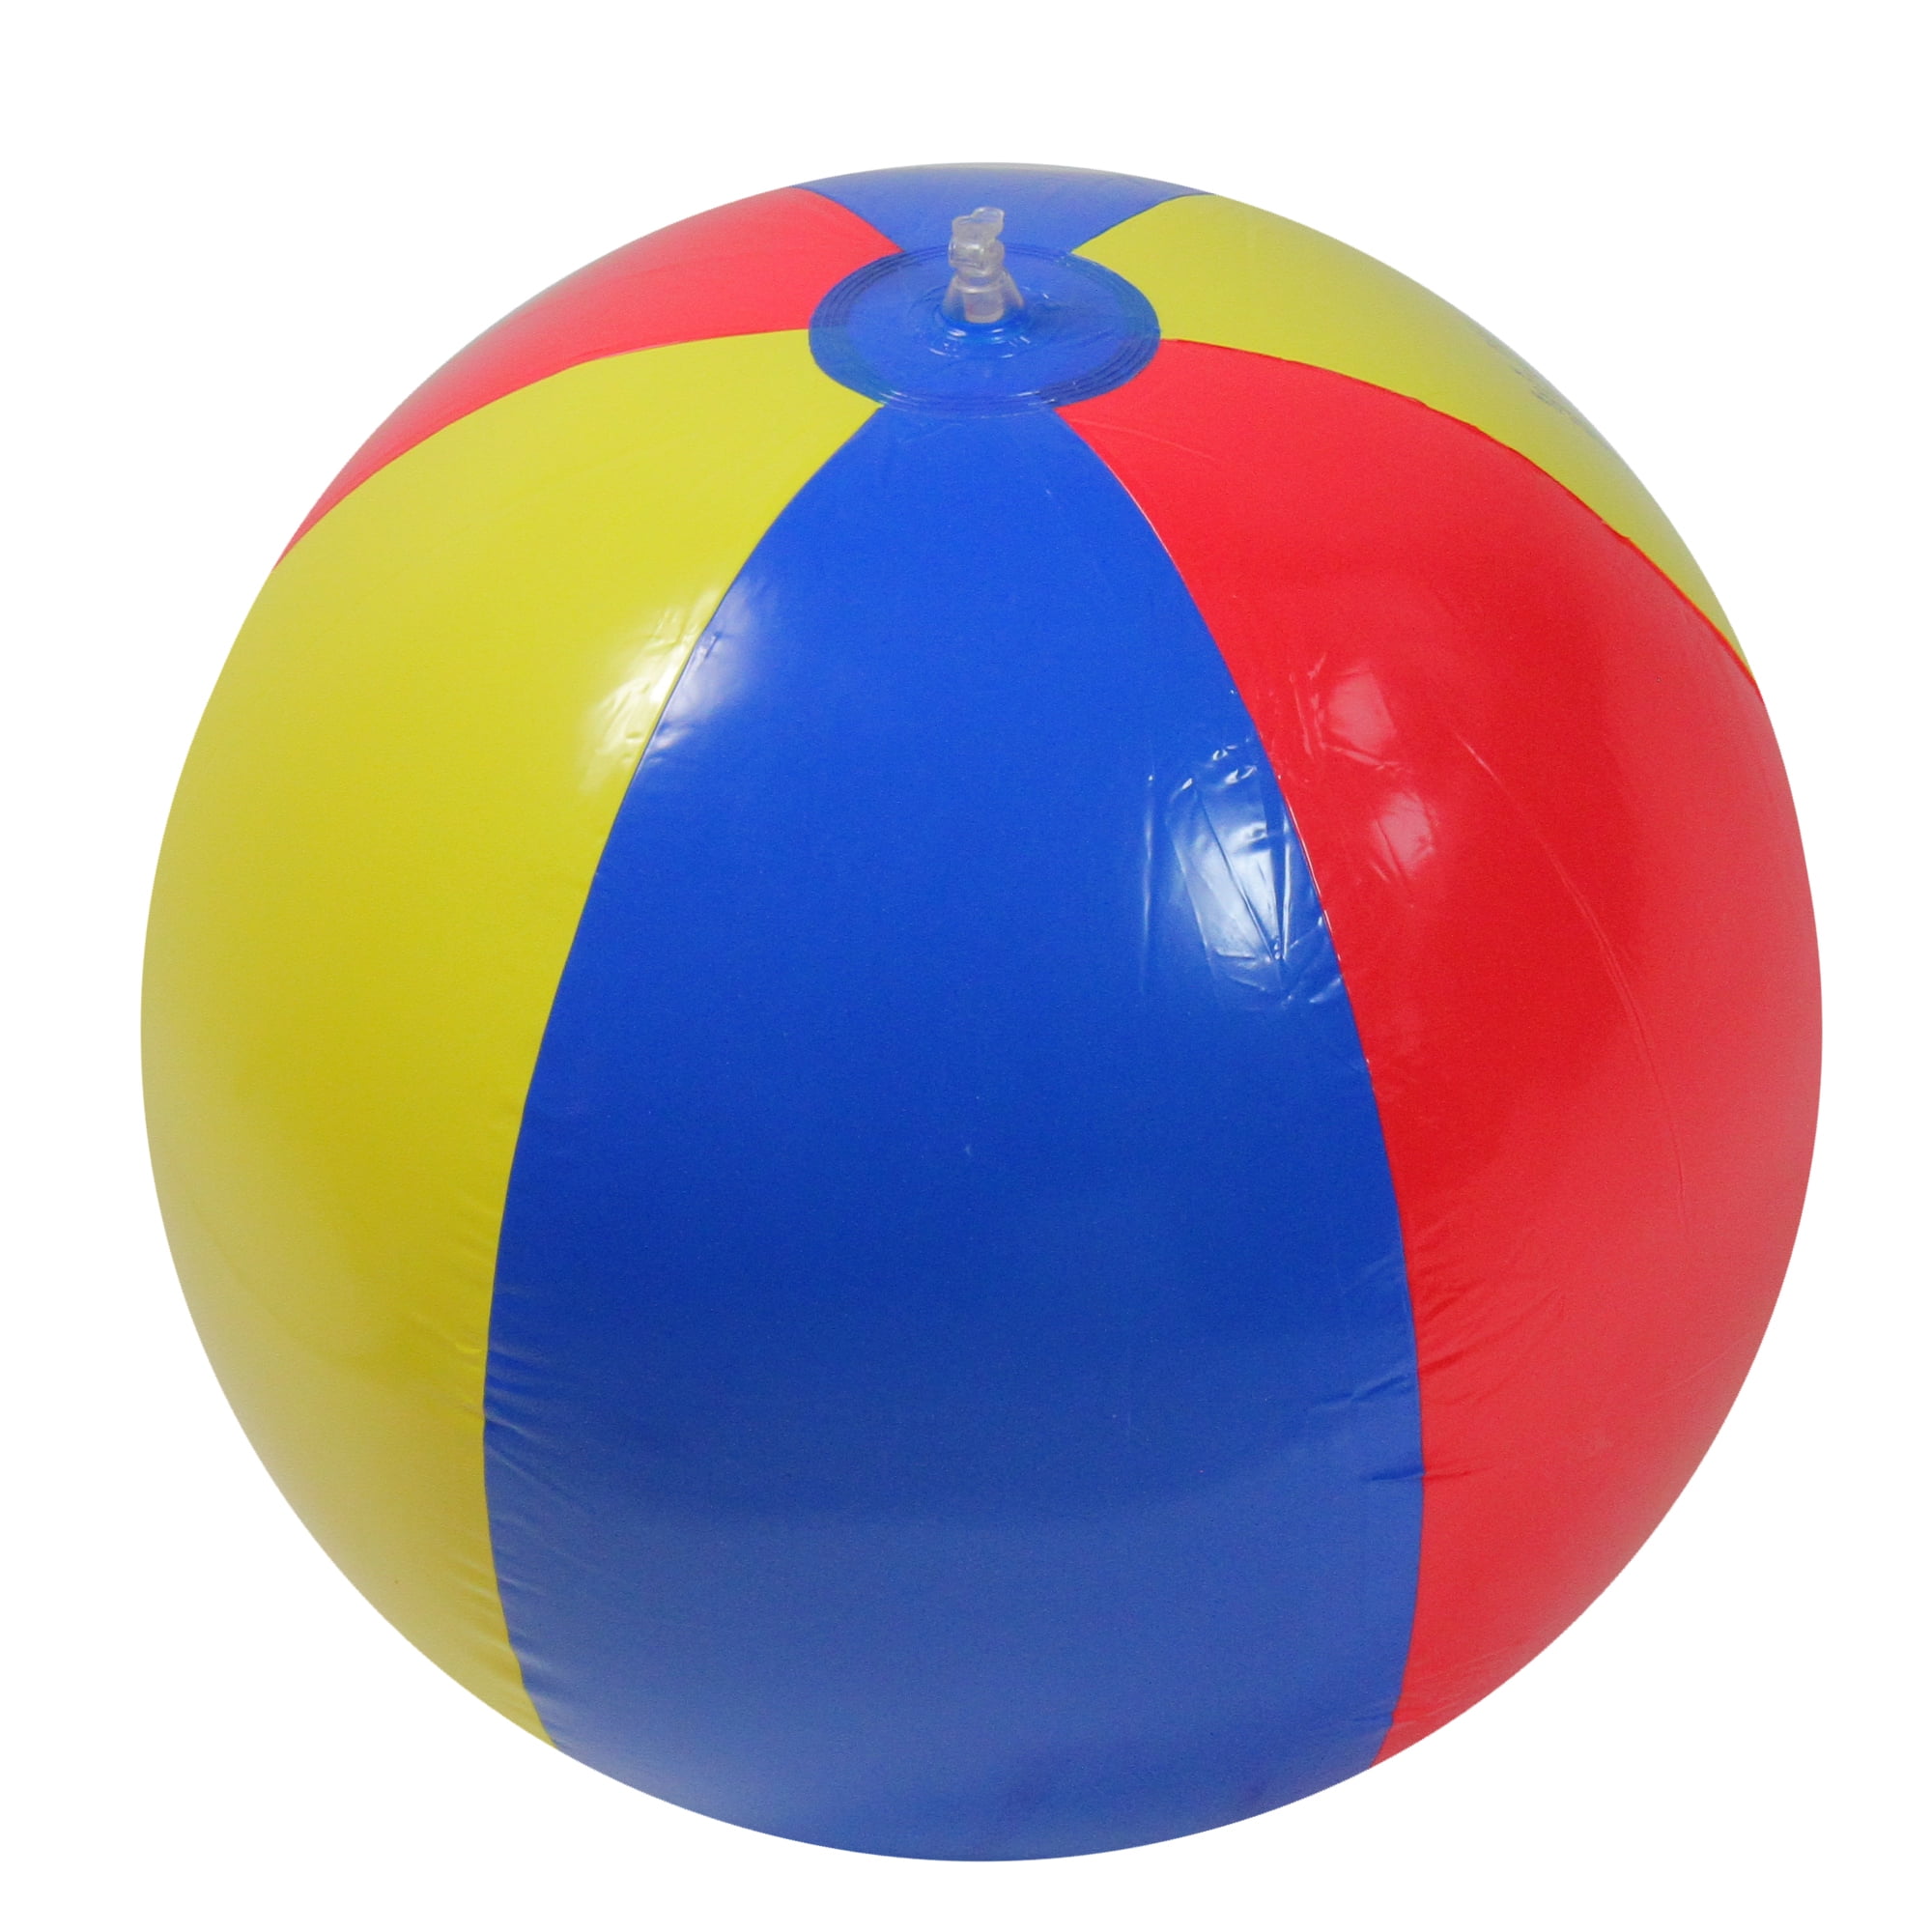 75 NEW MINI BEACH BALLS MULTI COLORED 5" INFLATABLE POOL BEACHBALL PARTY FAVORS 